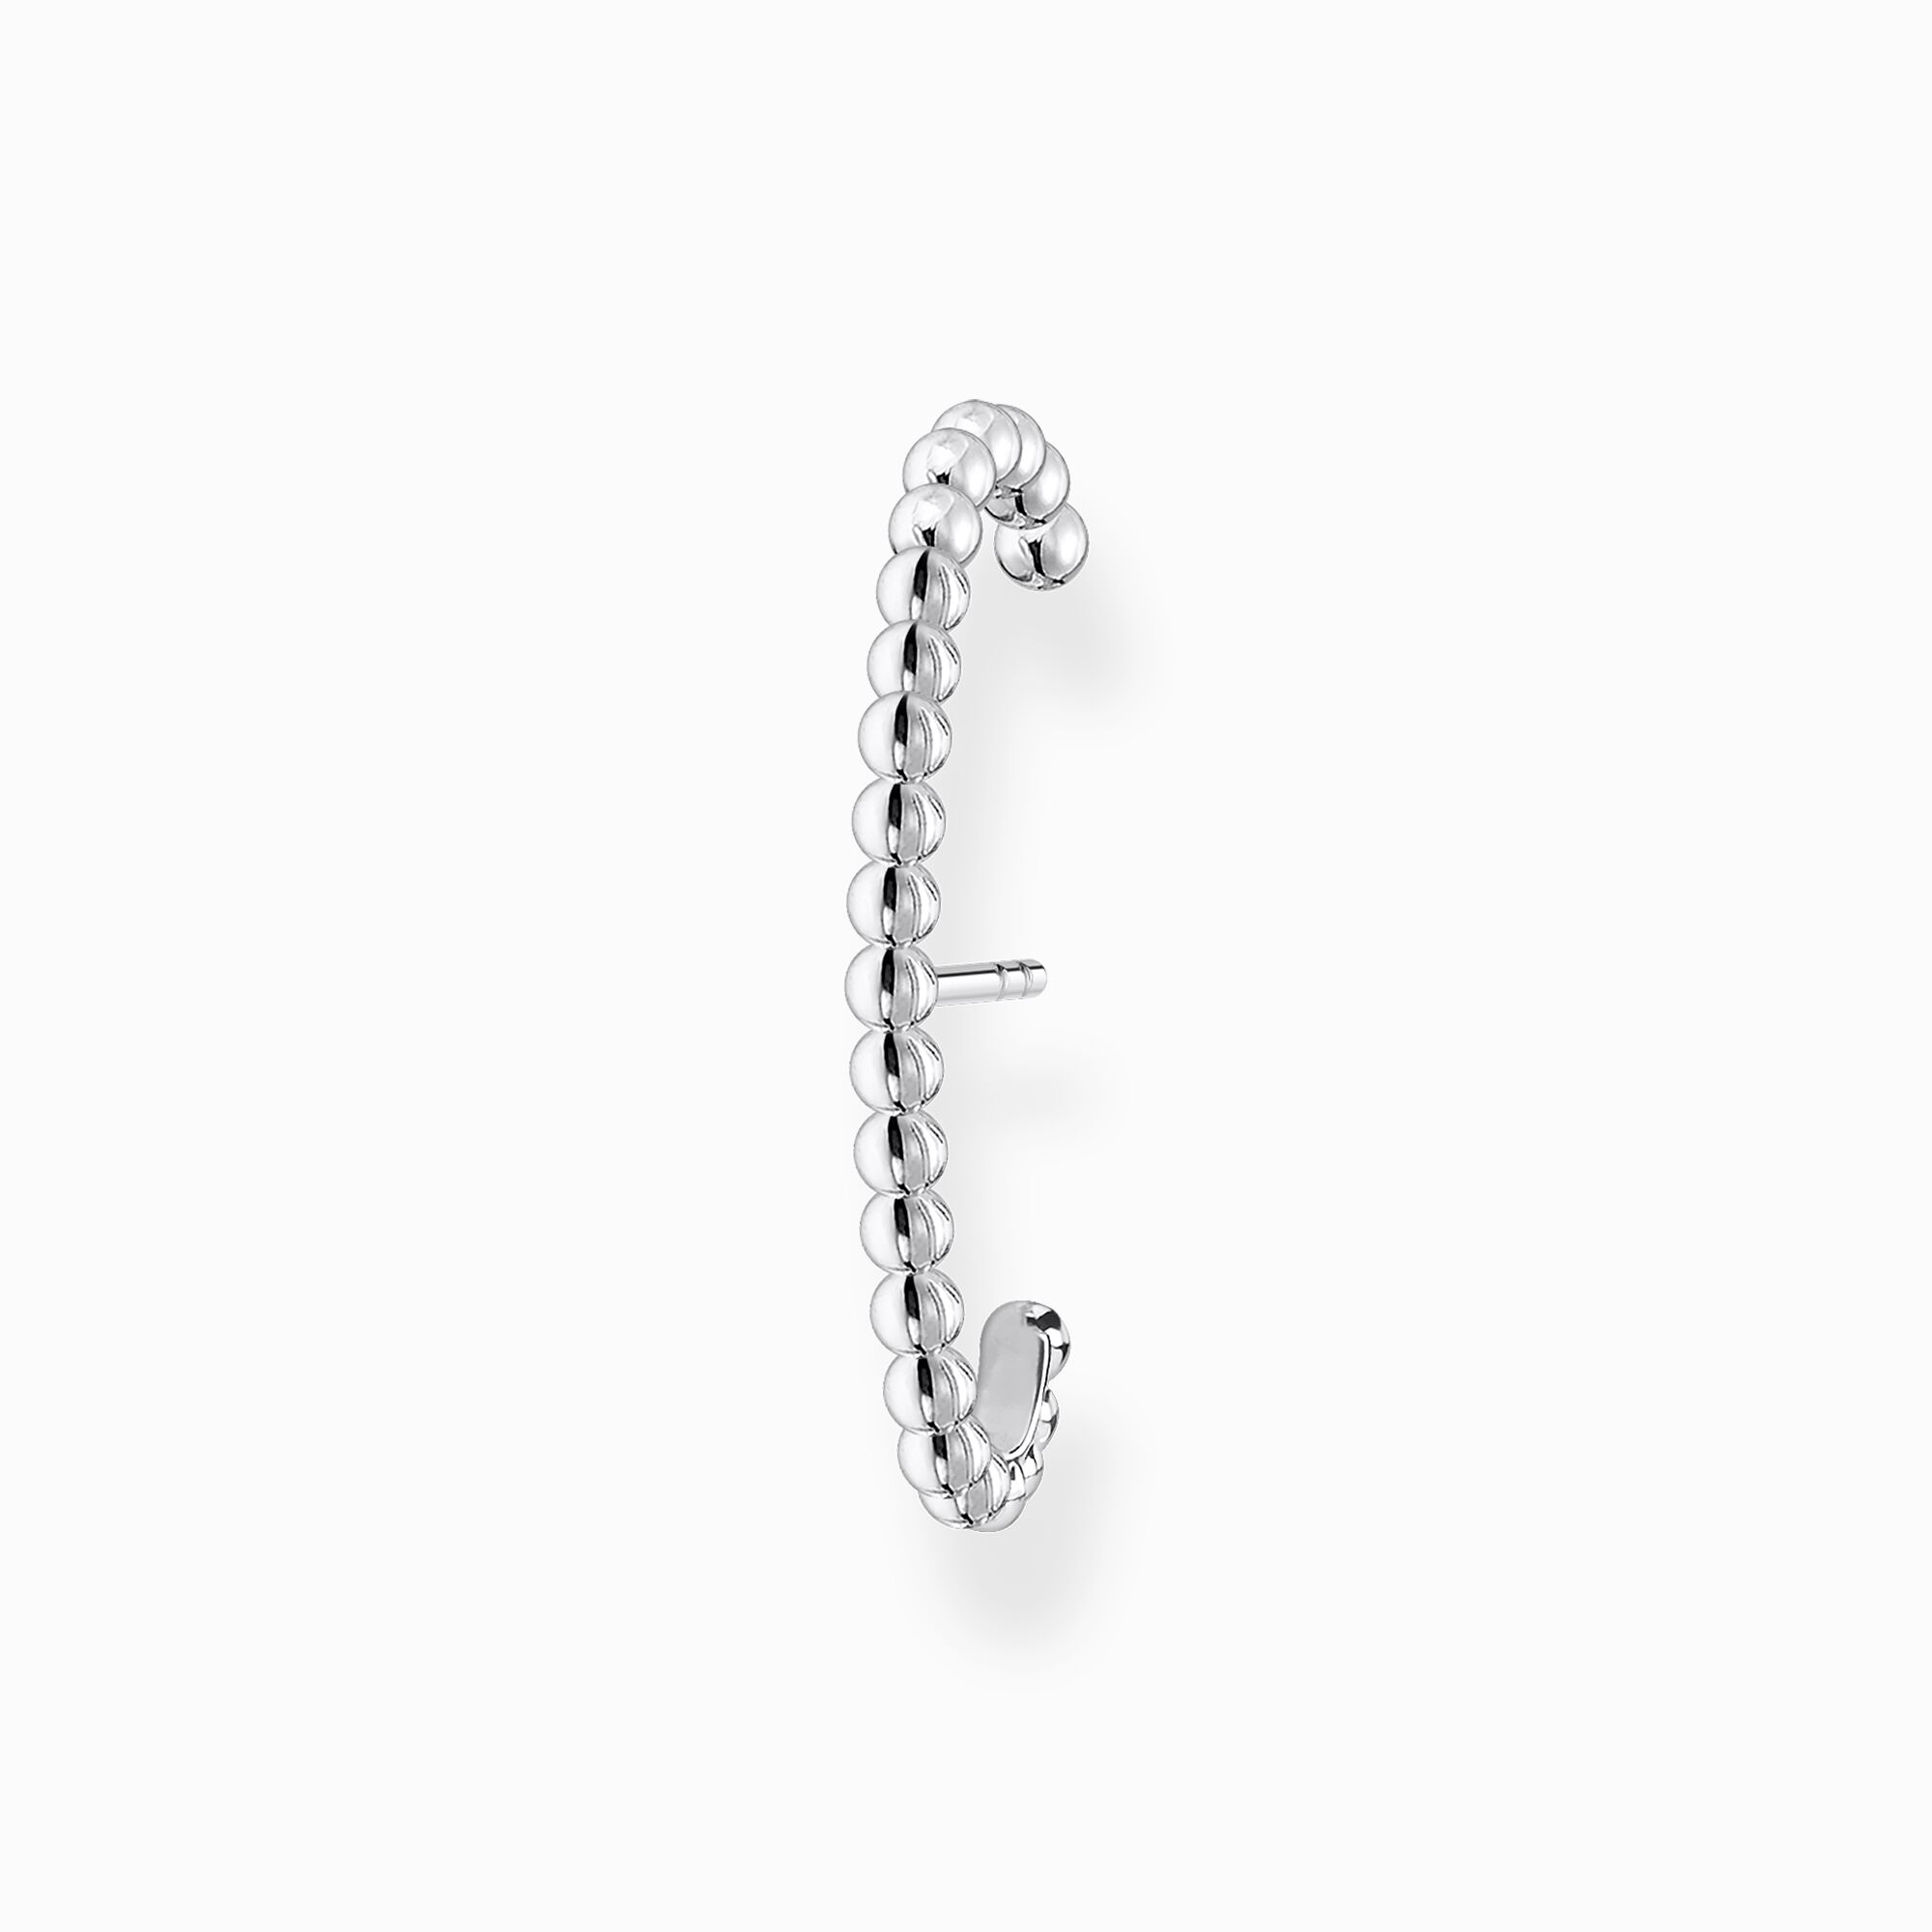 Fake ear cuff for your Piercing-Style: In silver │ THOMAS SABO